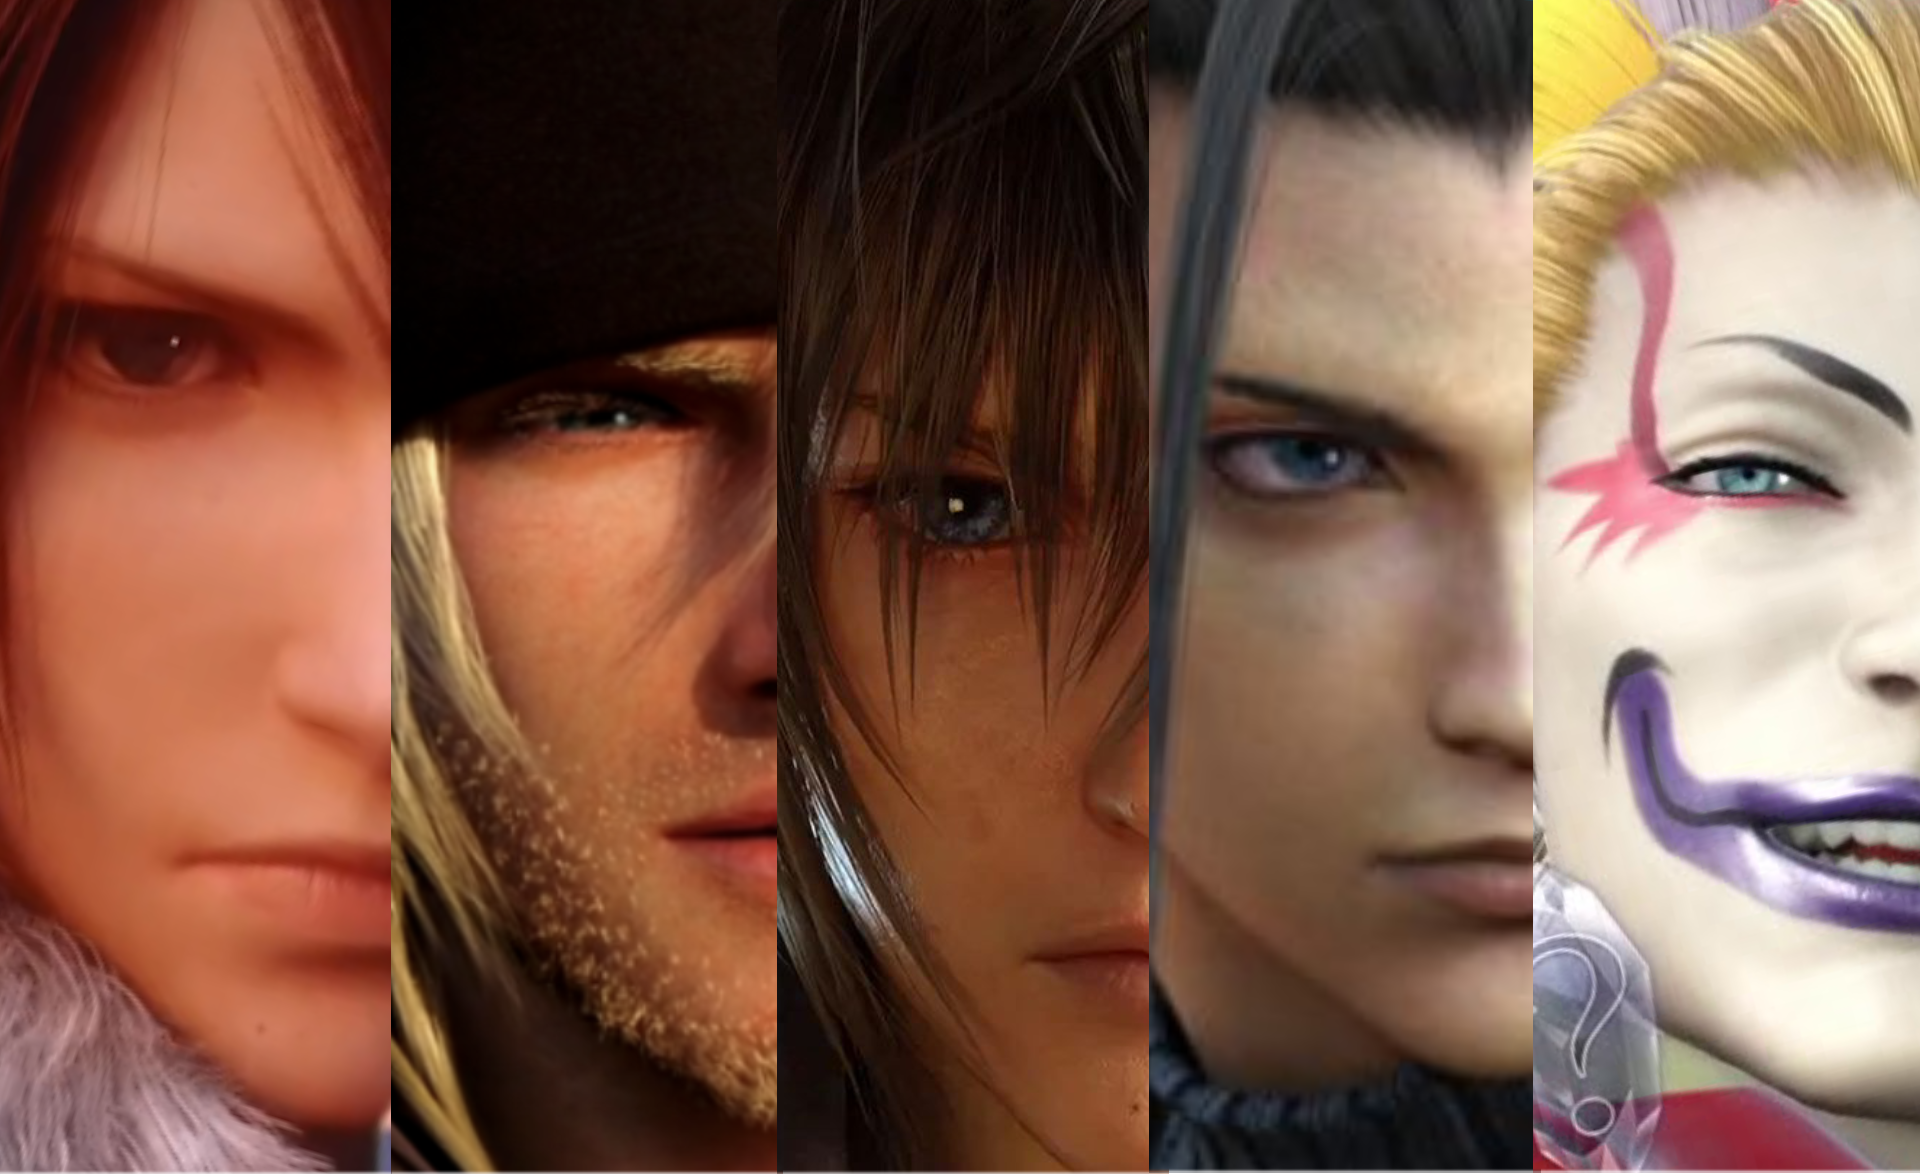 final fantasy male characters list